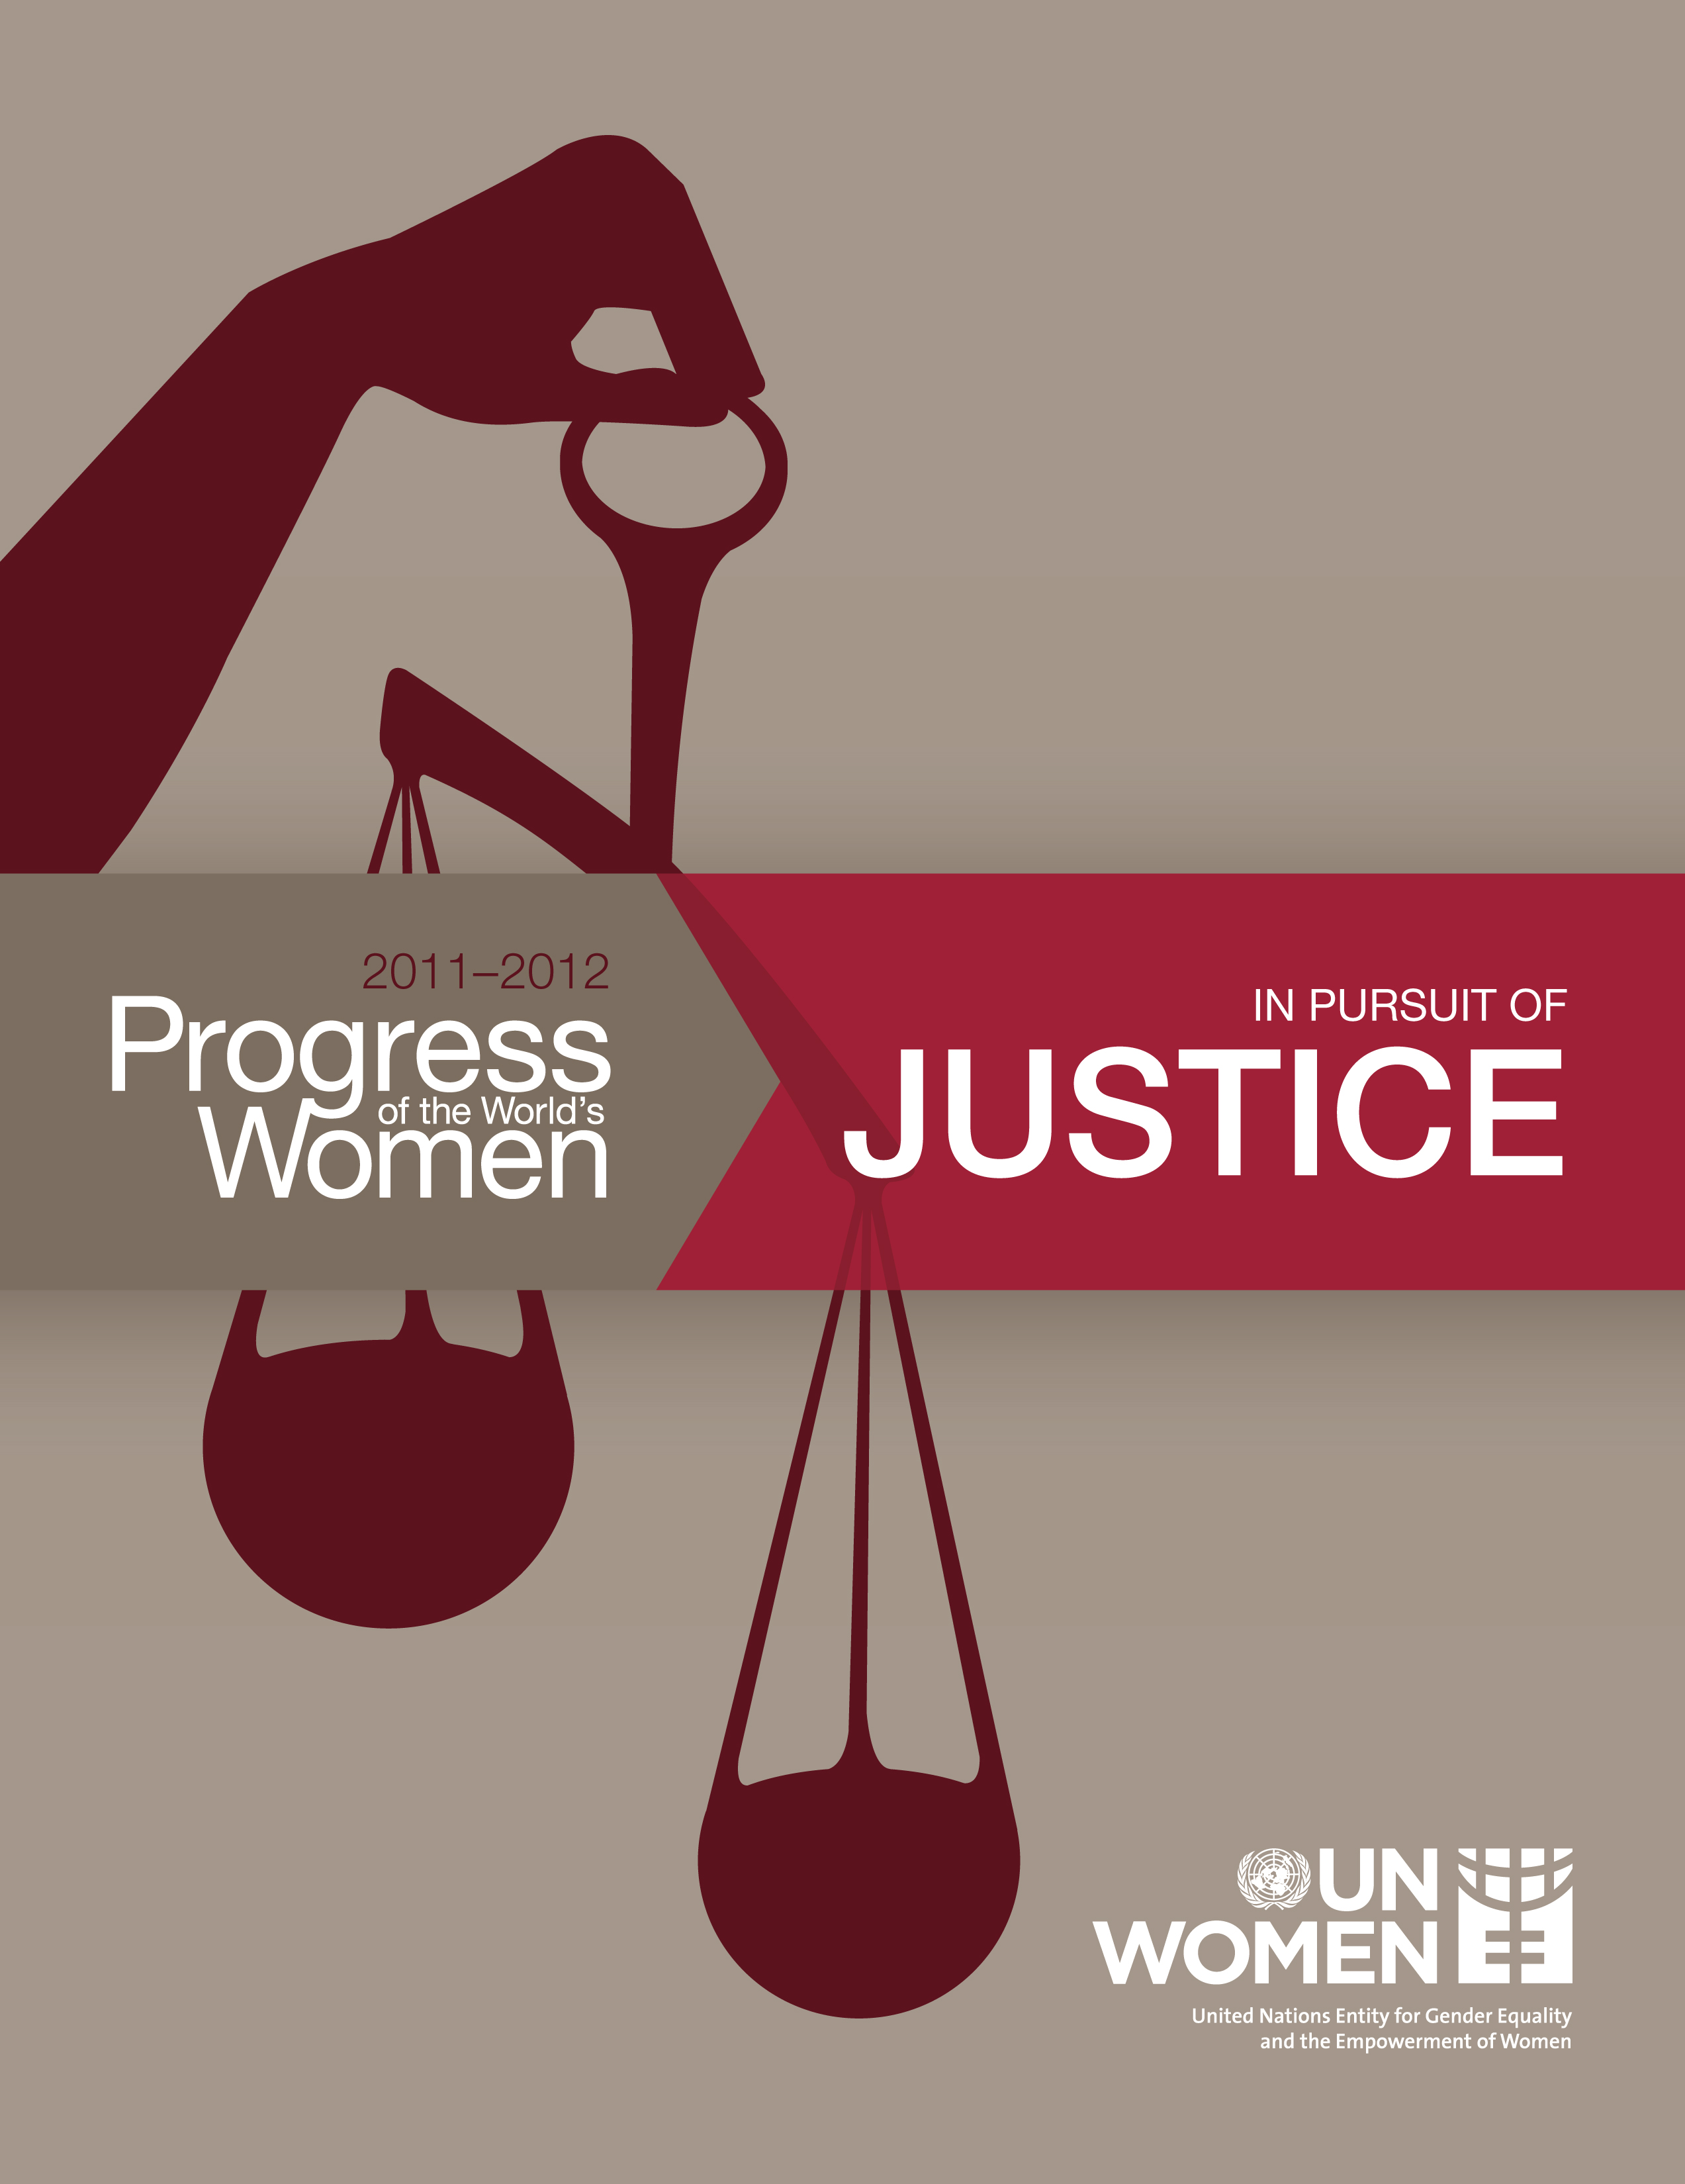 image of Ten recommendations to make justice systems work for women